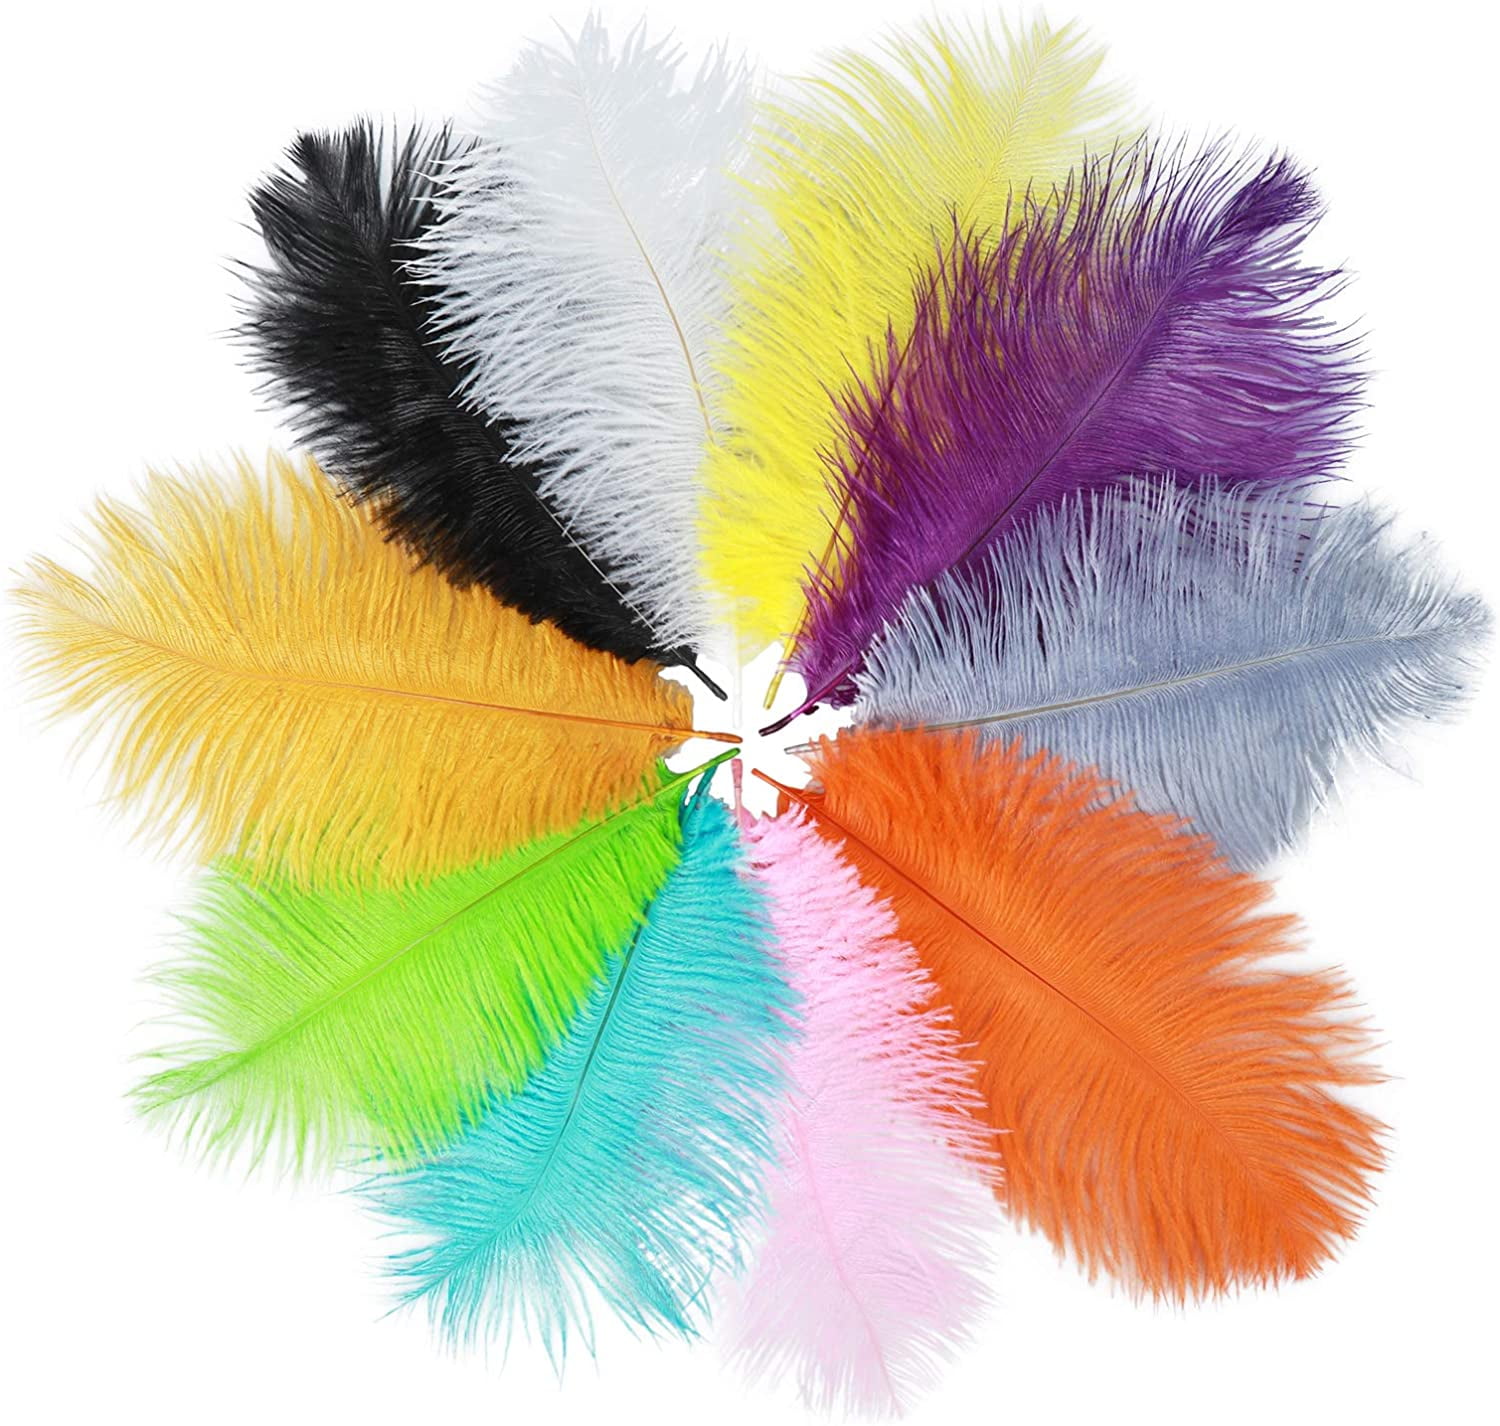 Craftsmanly Ostrich Feathers Trim 13 18CM Feather Plumes Ribbon For DIY  Wedding Dress Decoration & Crafts Accessories From Deng09, $10.76